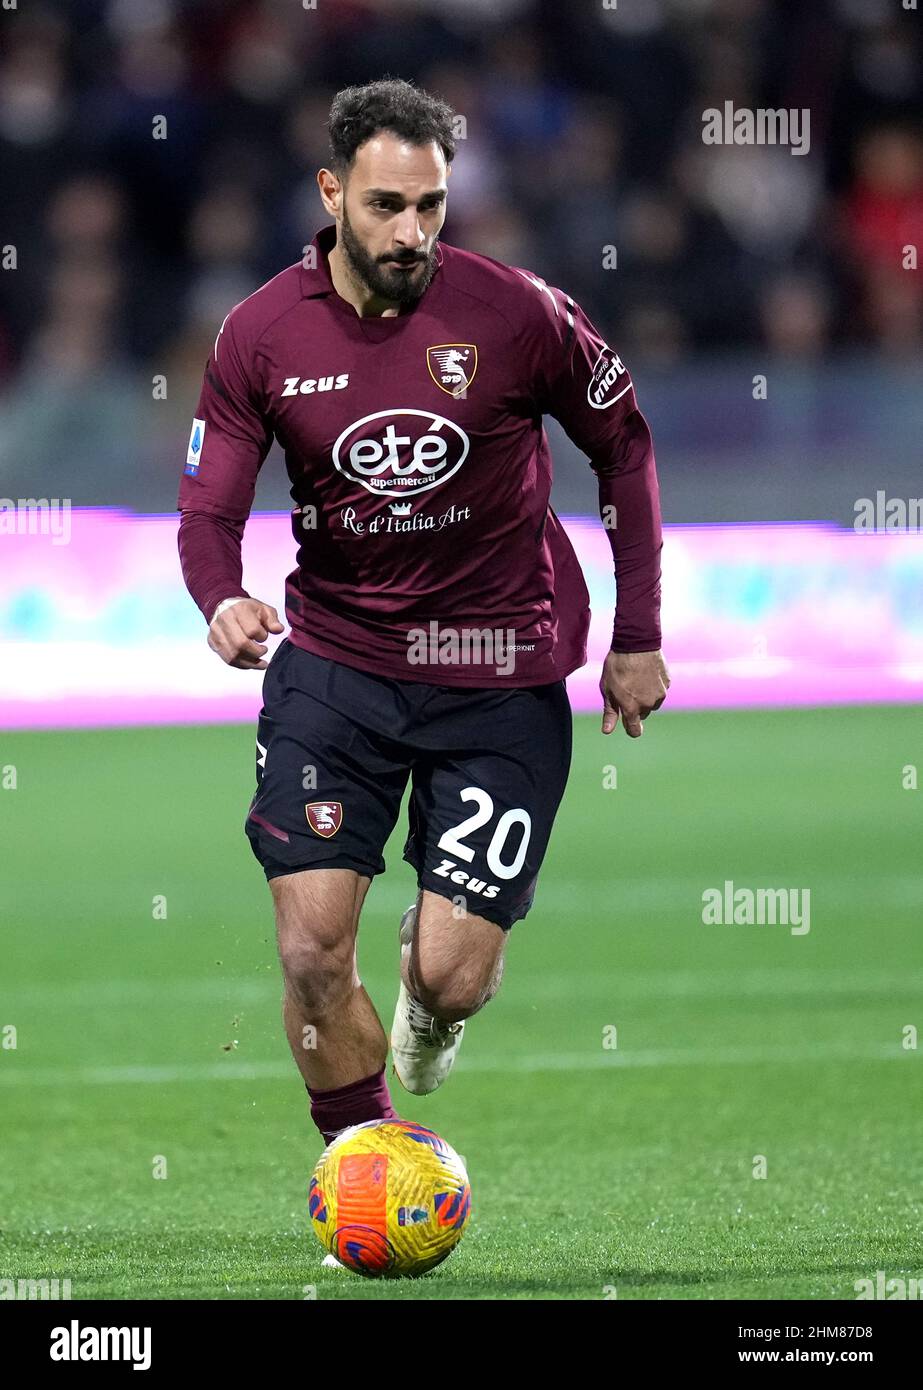 SALERNO, ITALY - FEBRUARY 07: Grigoris Kastanos of US Salernitana in action  ,during the Serie A match between US Salernitana and Spezia Calcio at  Stadio Arechi on February 7, 2022 in Salerno,